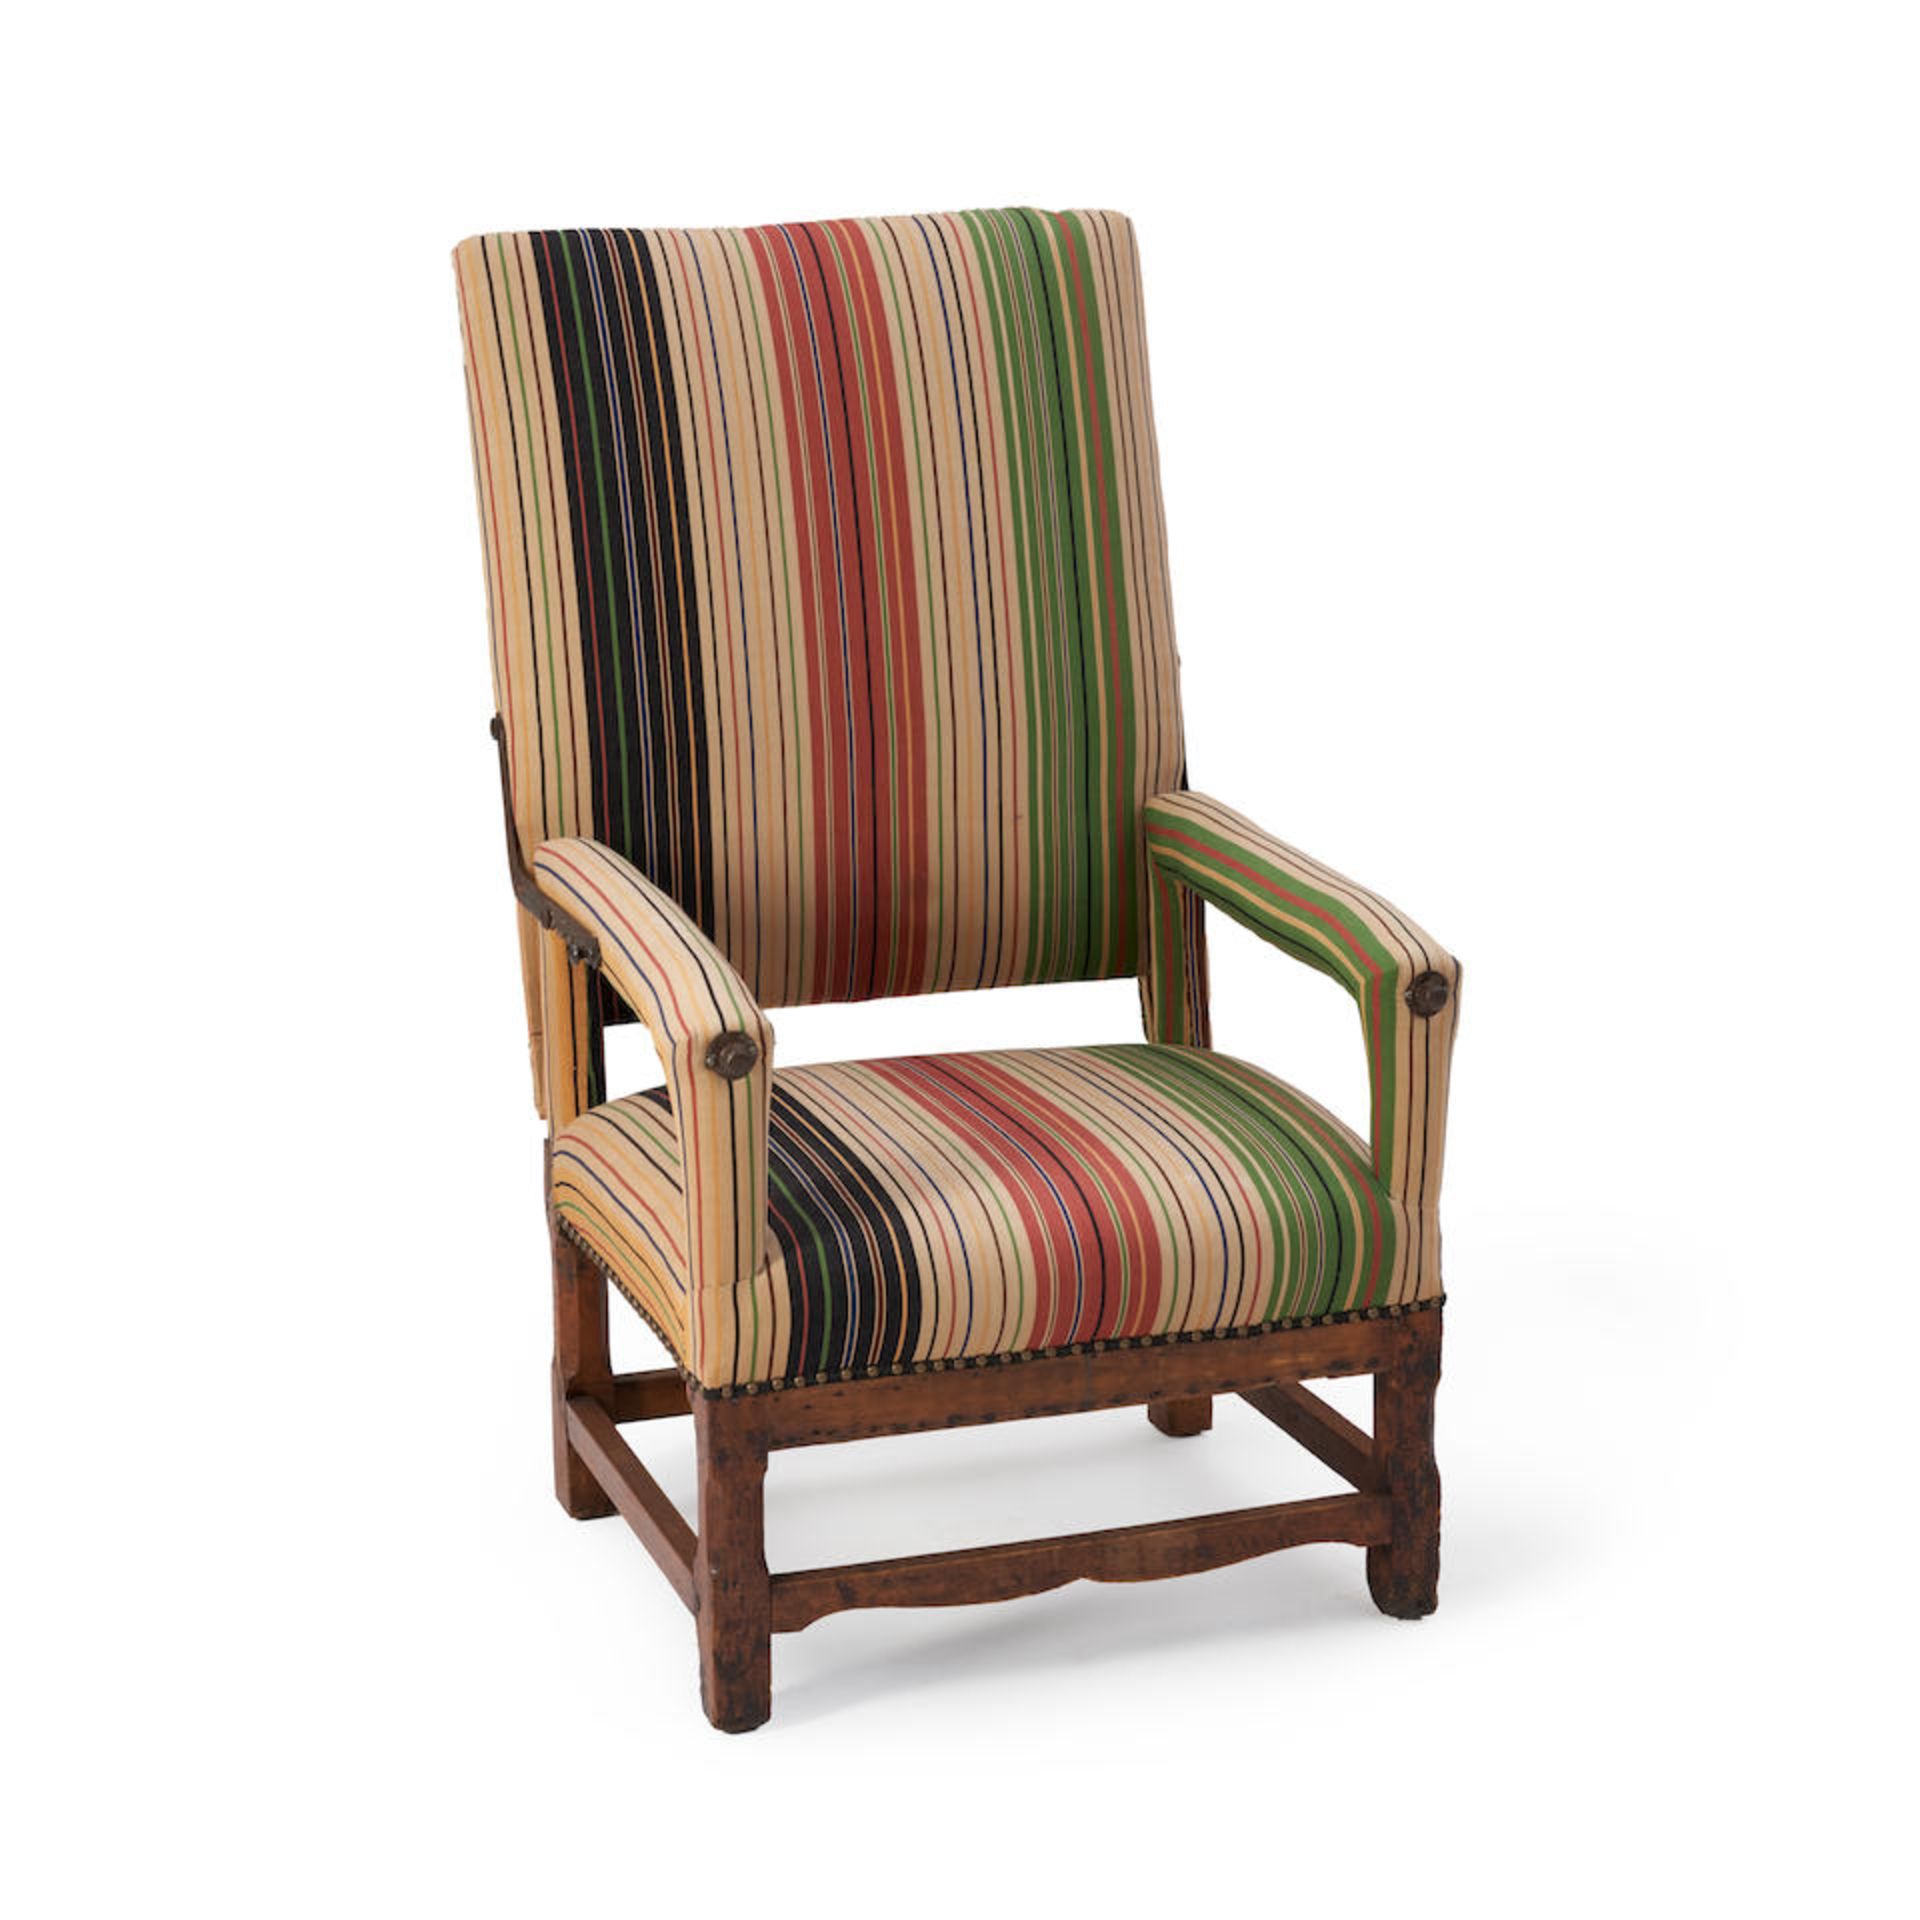 FEDERAL-STYLE PINE UPHOLSTERED RECLINGING ARMCHAIR